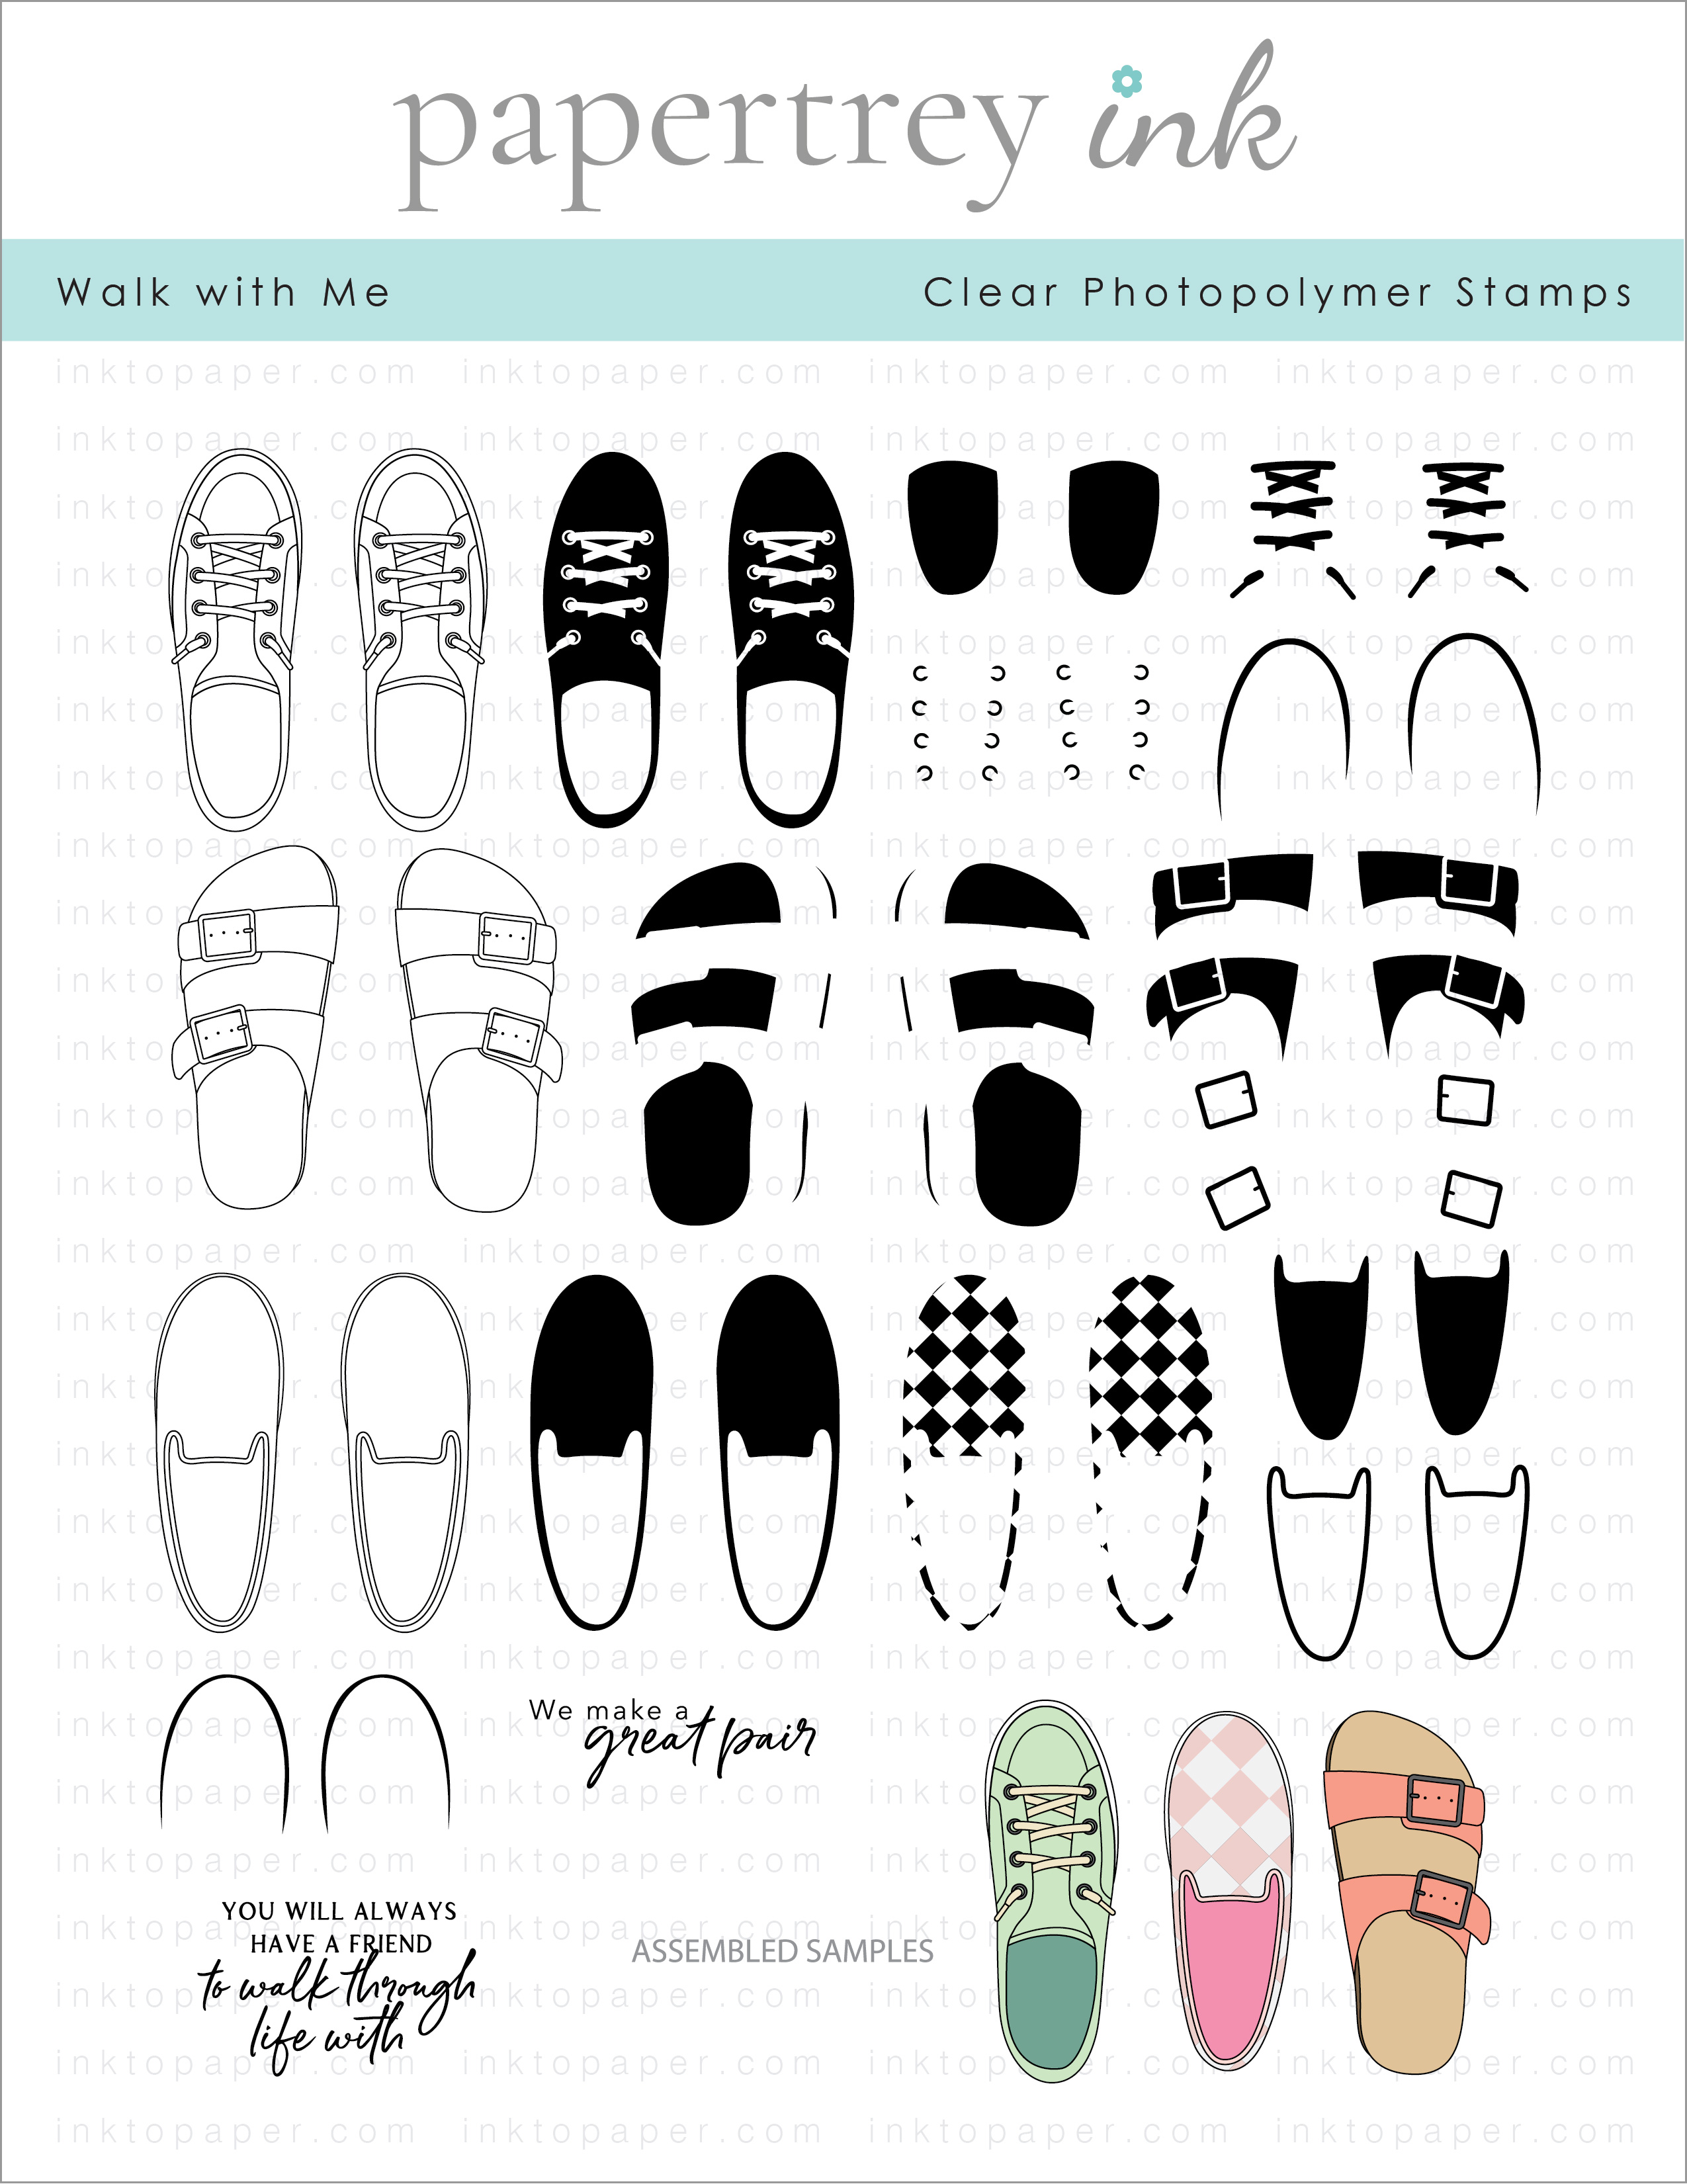 Walk with Me Stamp Set: Papertrey Ink